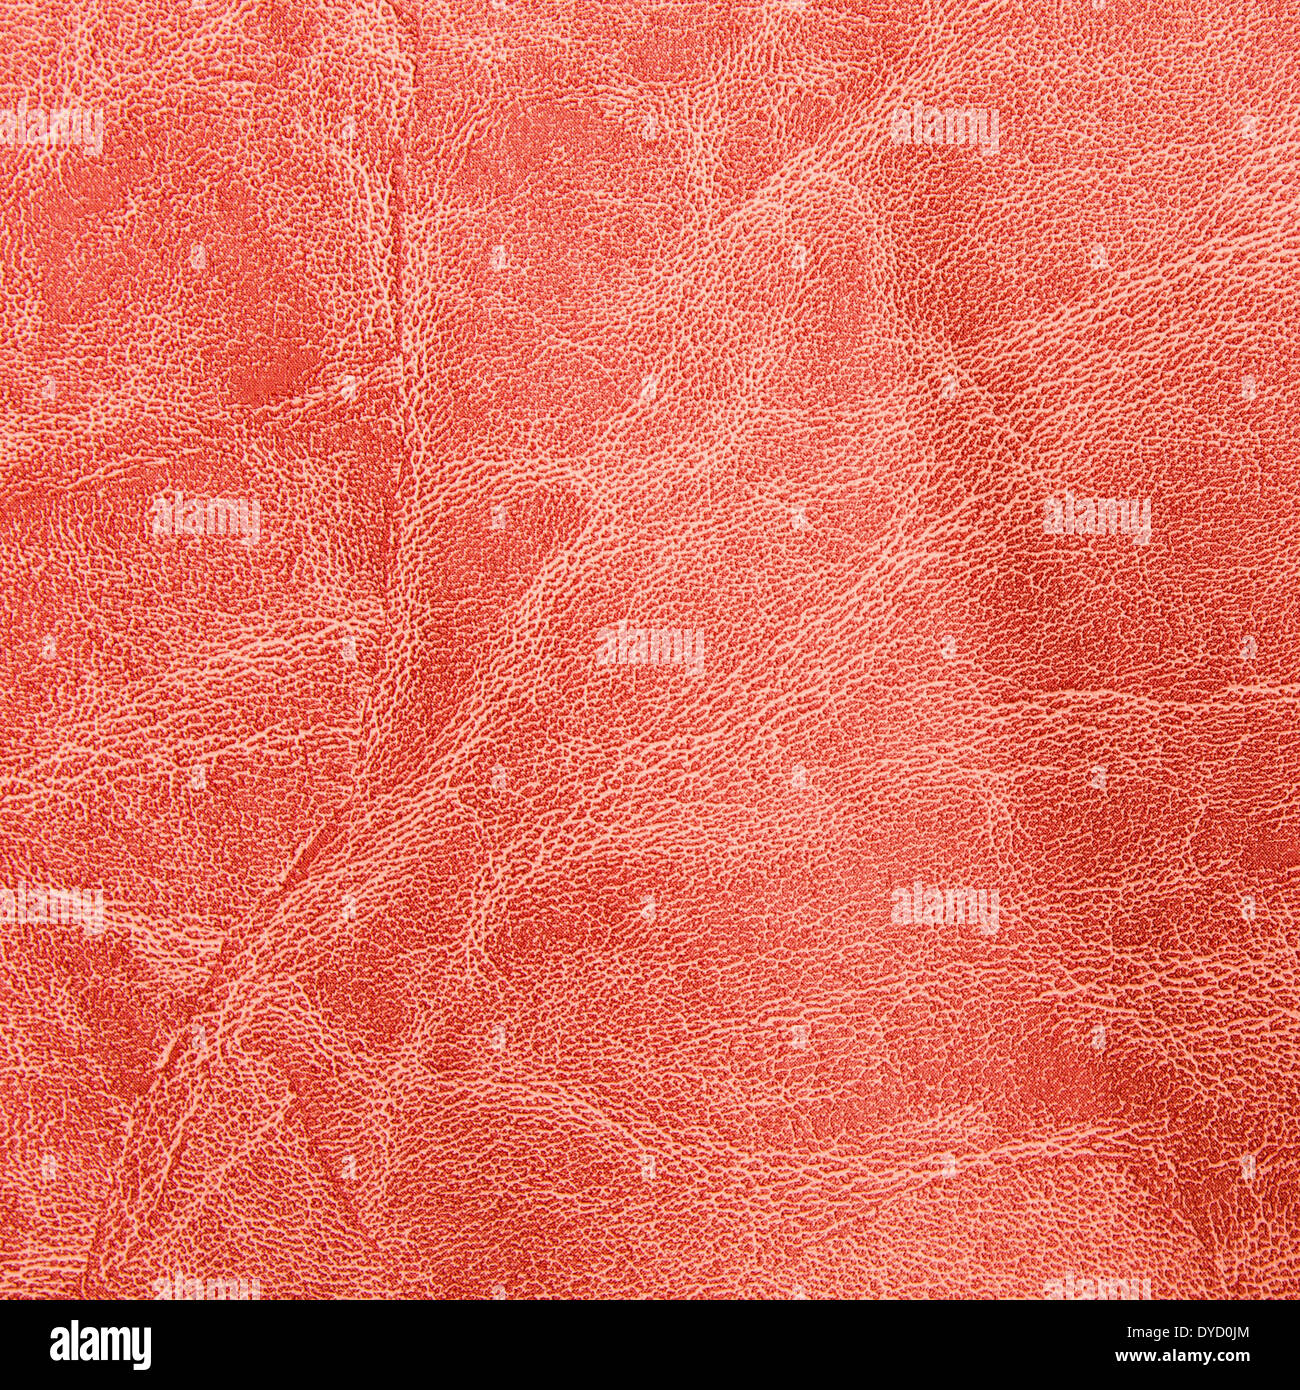 Red worn leather texture background Stock Photo